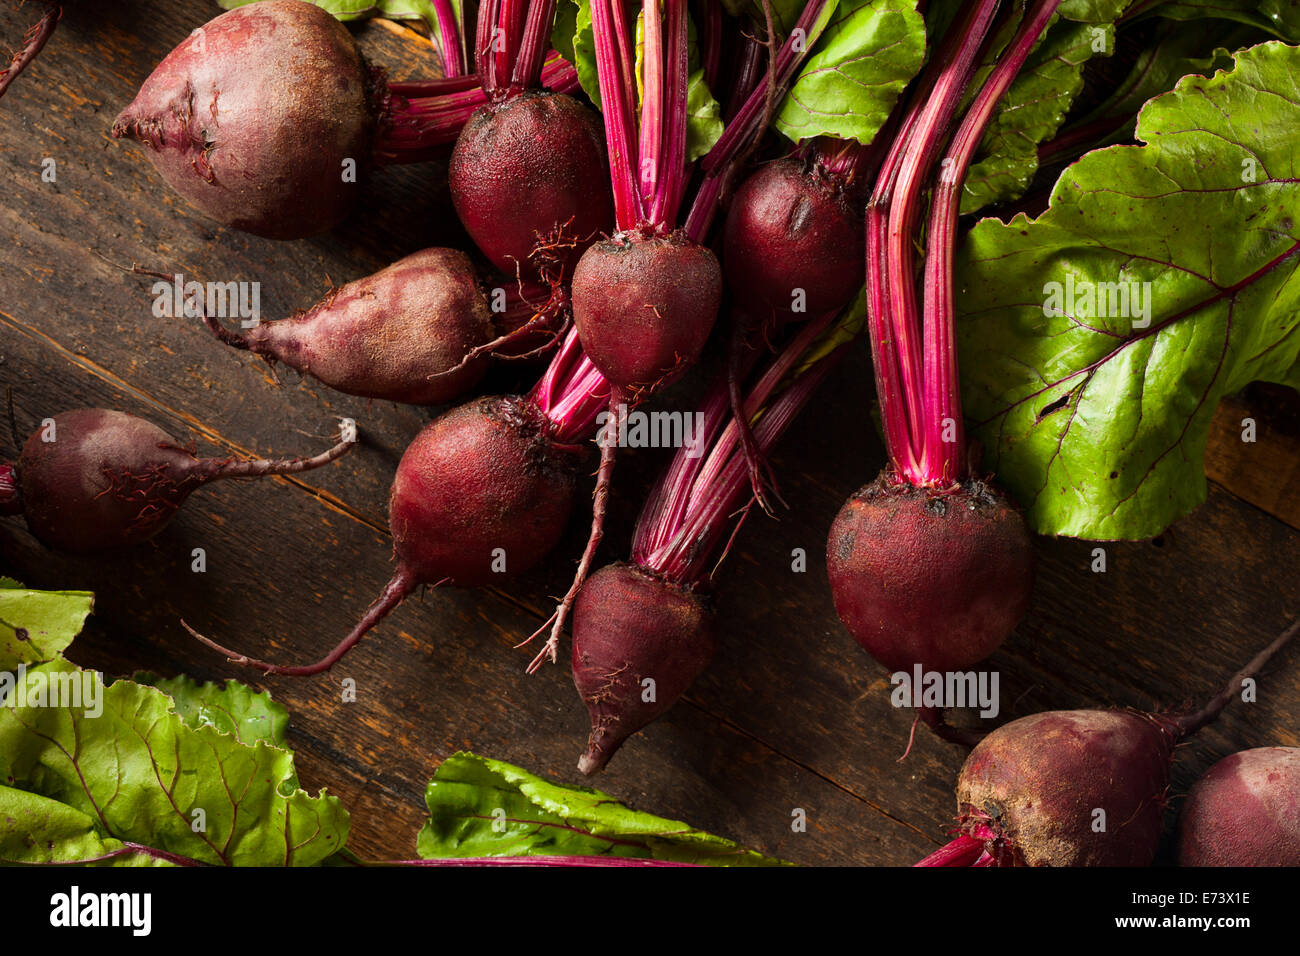 Raw Organic Red Beets Ready To Eat Stock Photo